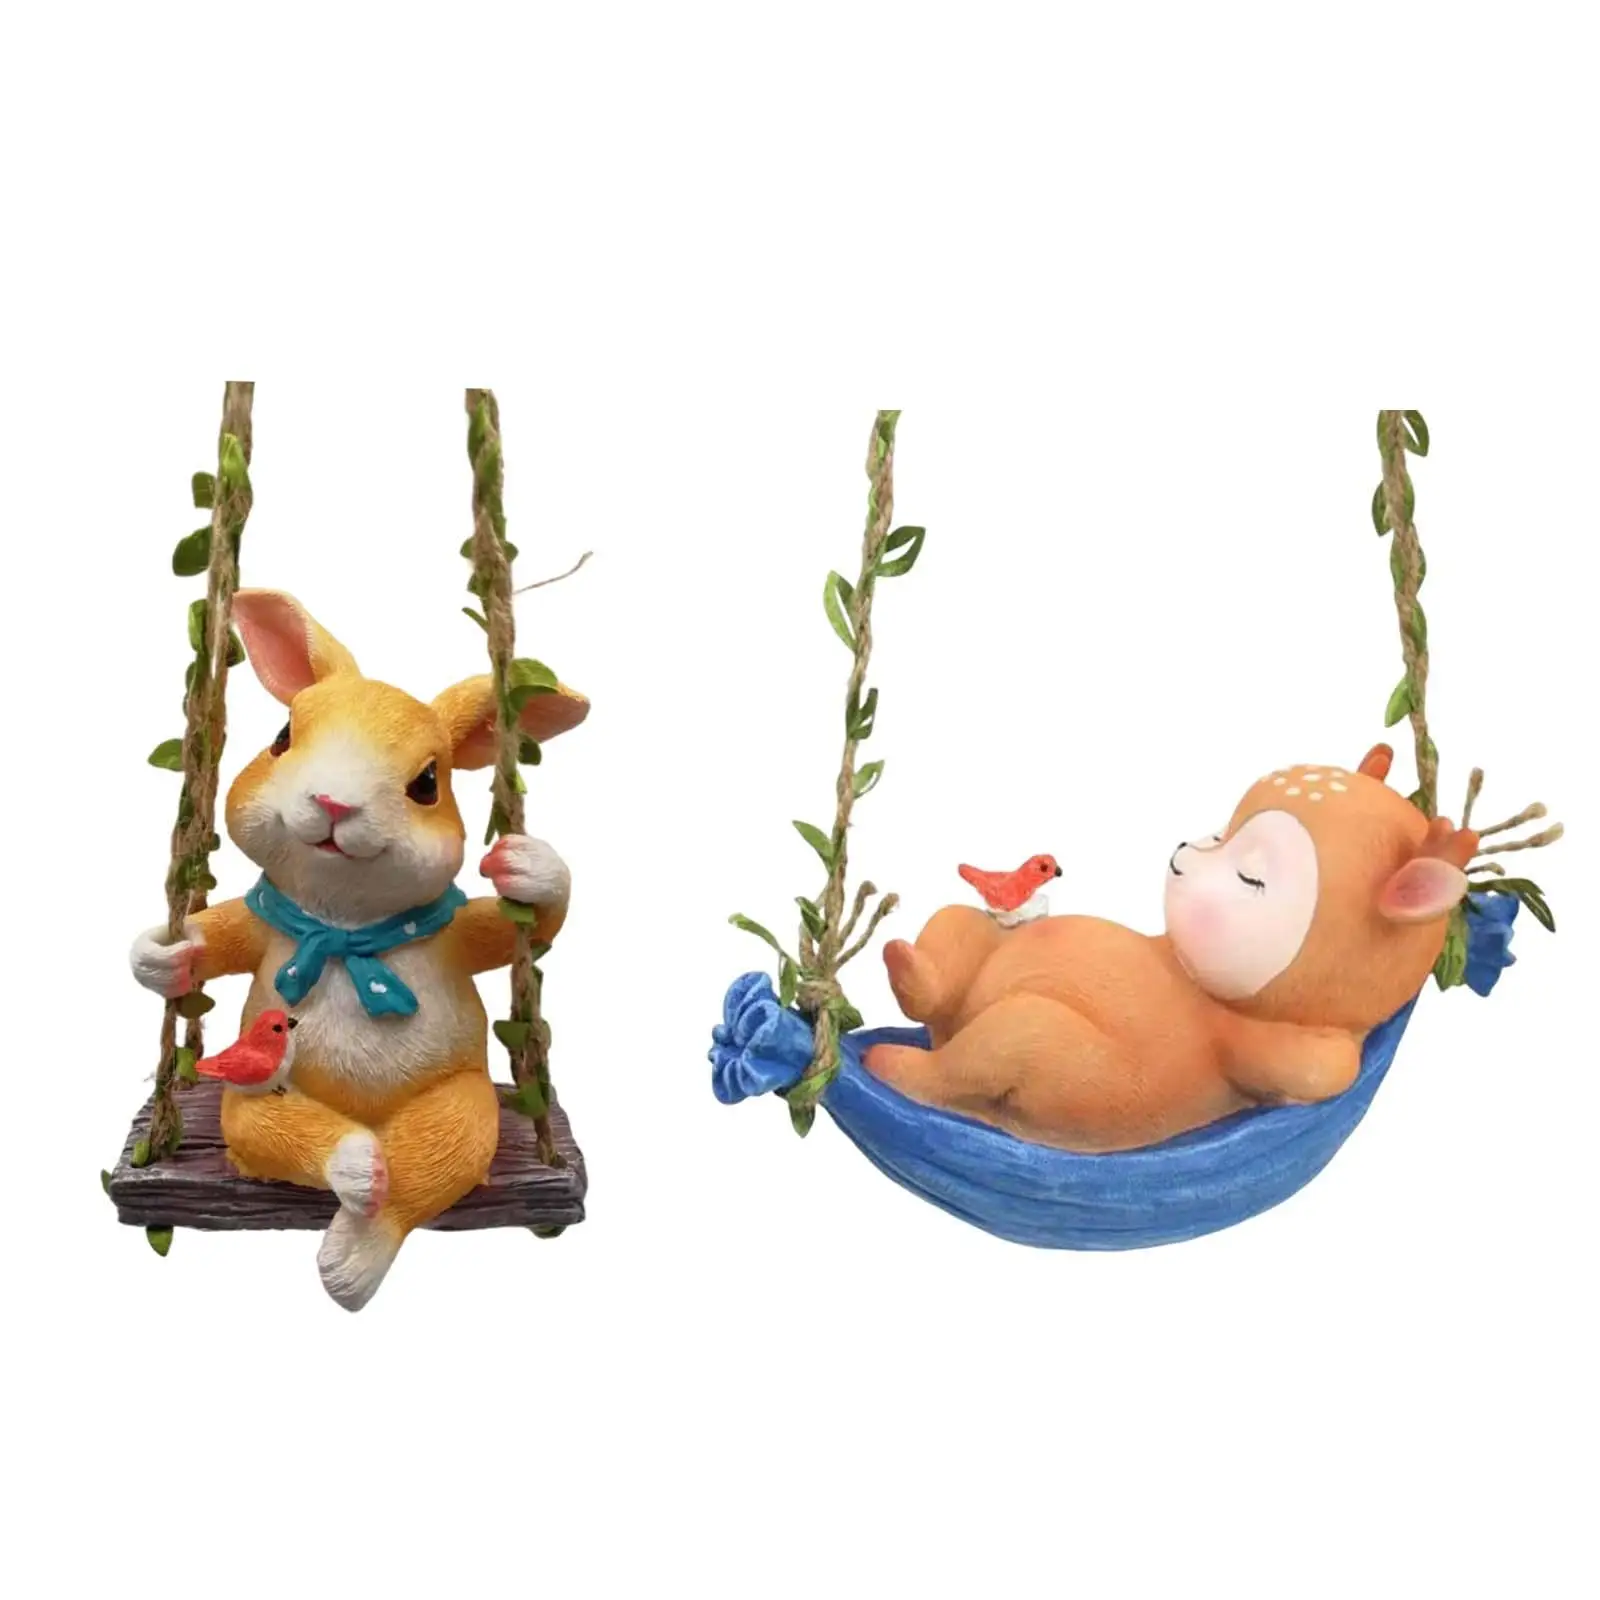 

Resin Swing On Animal Statue Figurines Outdoor Animal Sculpture Hanging Garden Statues for Yard Tree Décor Gift Ornament